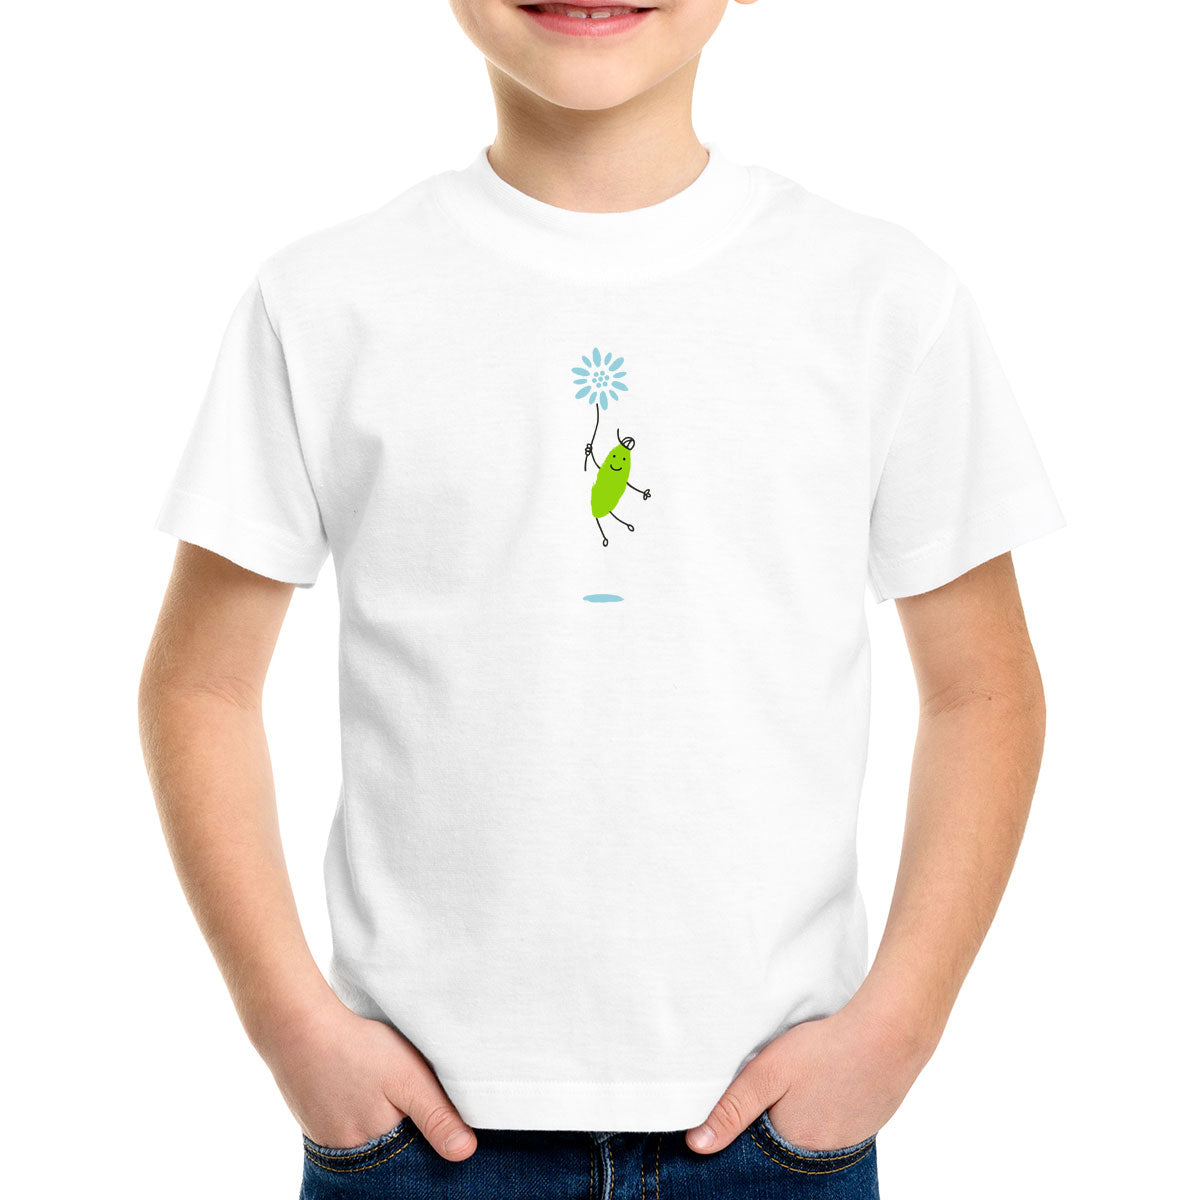 Daisy Appeal Kids Charity T-Shirt - 3 Designs